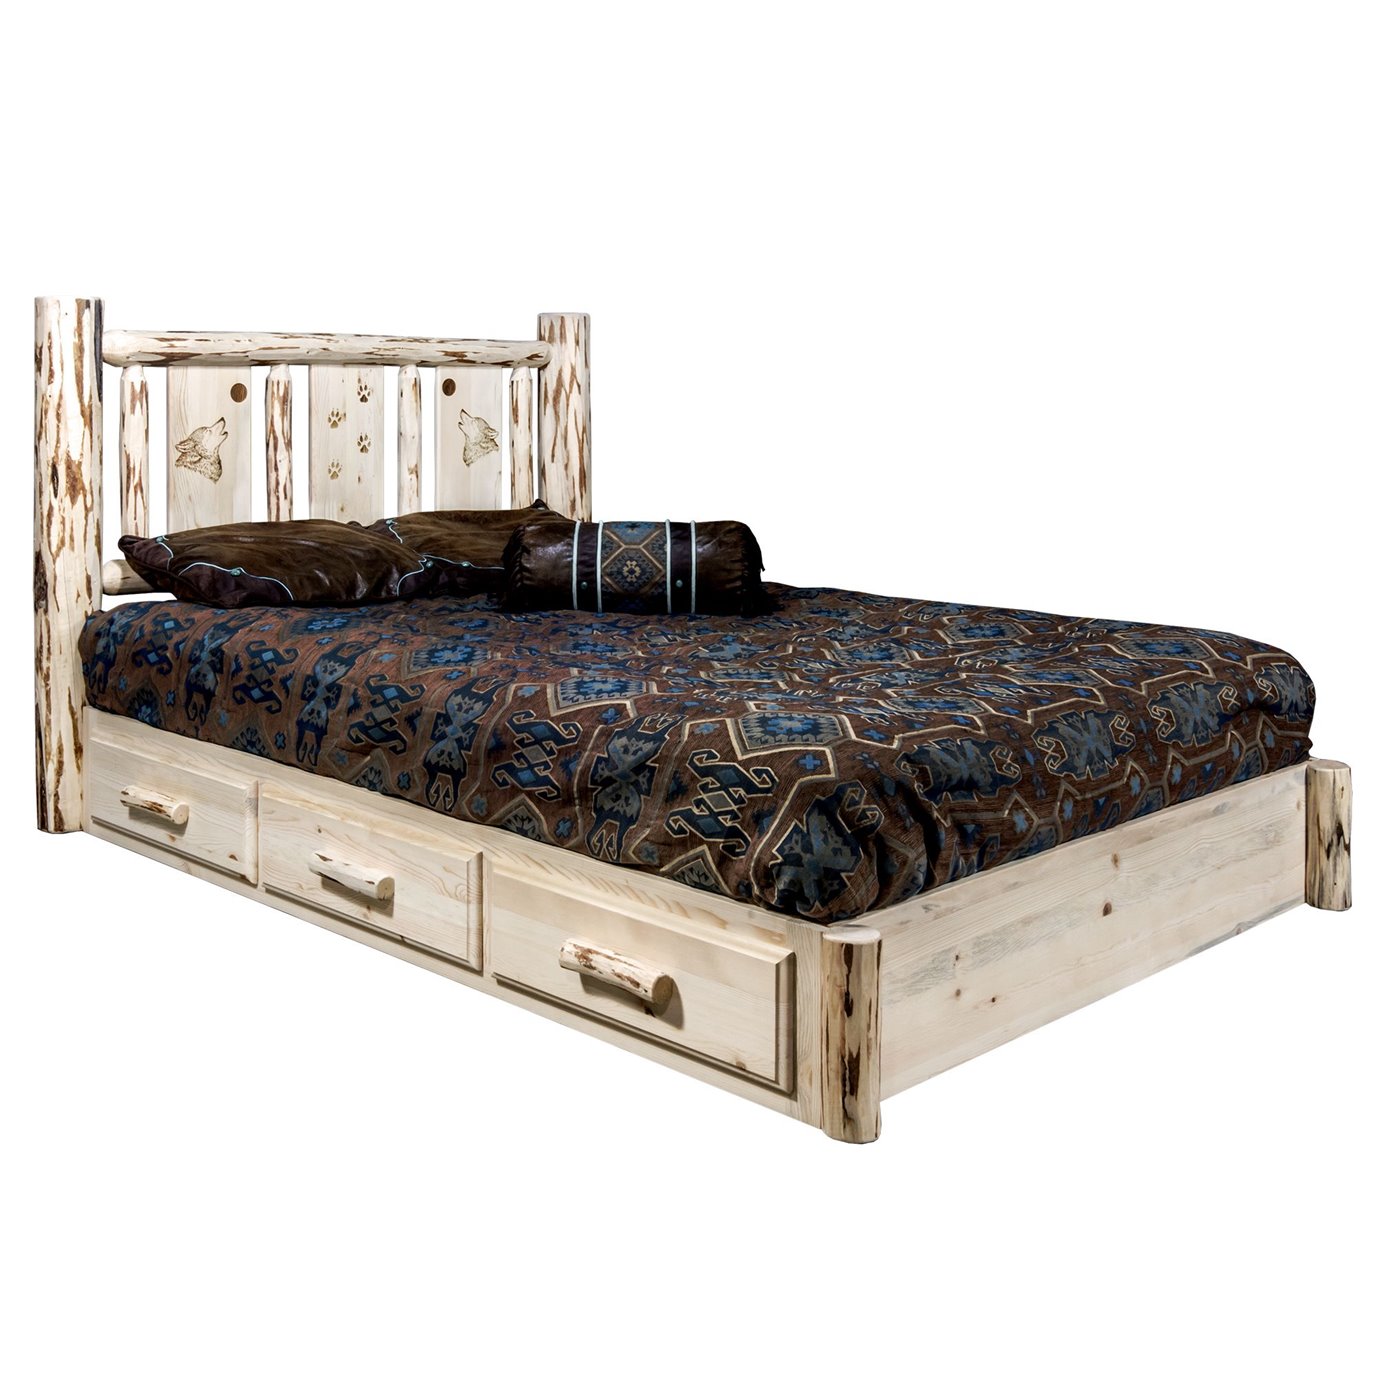 Montana Cal King Platform Bed w/ Storage & Laser Engraved Wolf Design - Clear Lacquer Finish